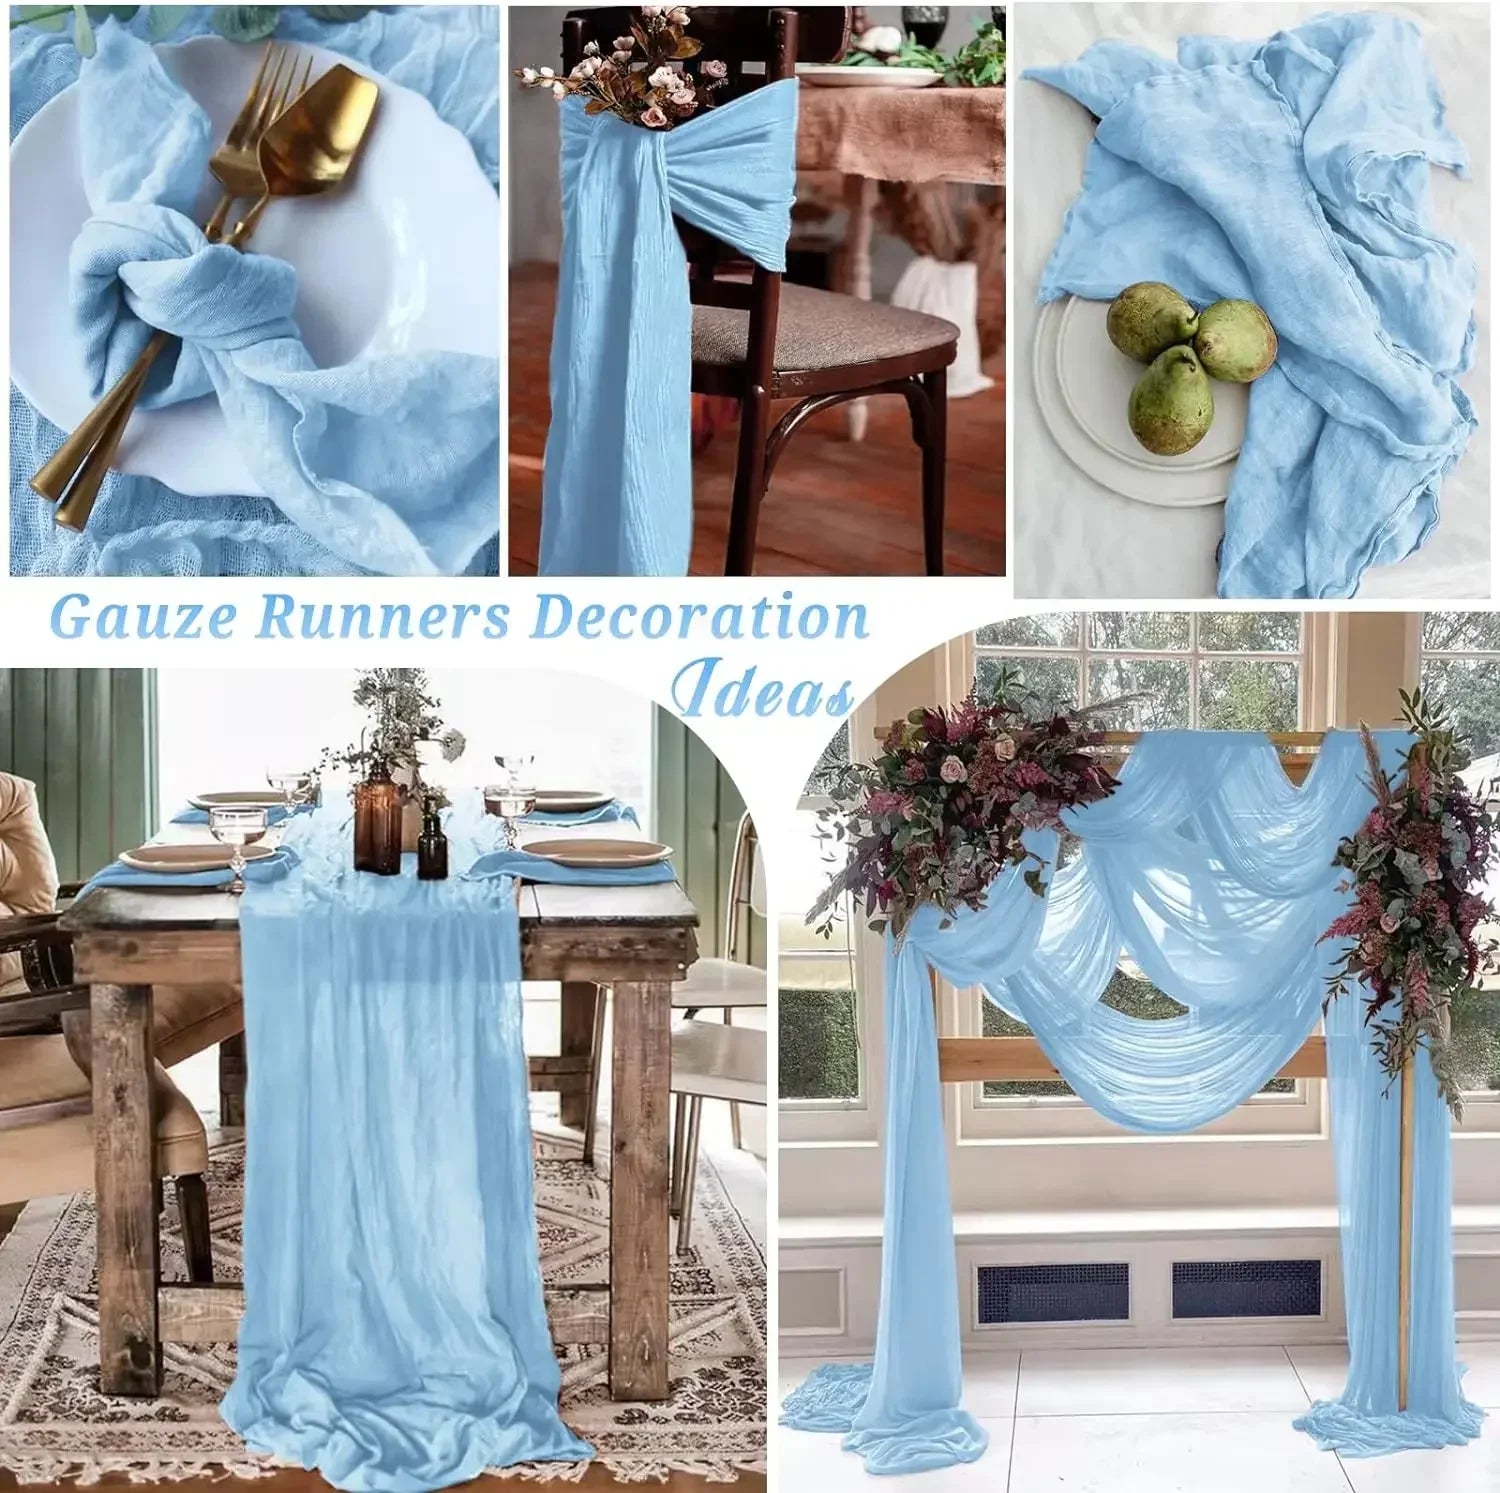 10PCS Baby Blue Cheesecloth Table Runner 10FT Gauze Table Runner